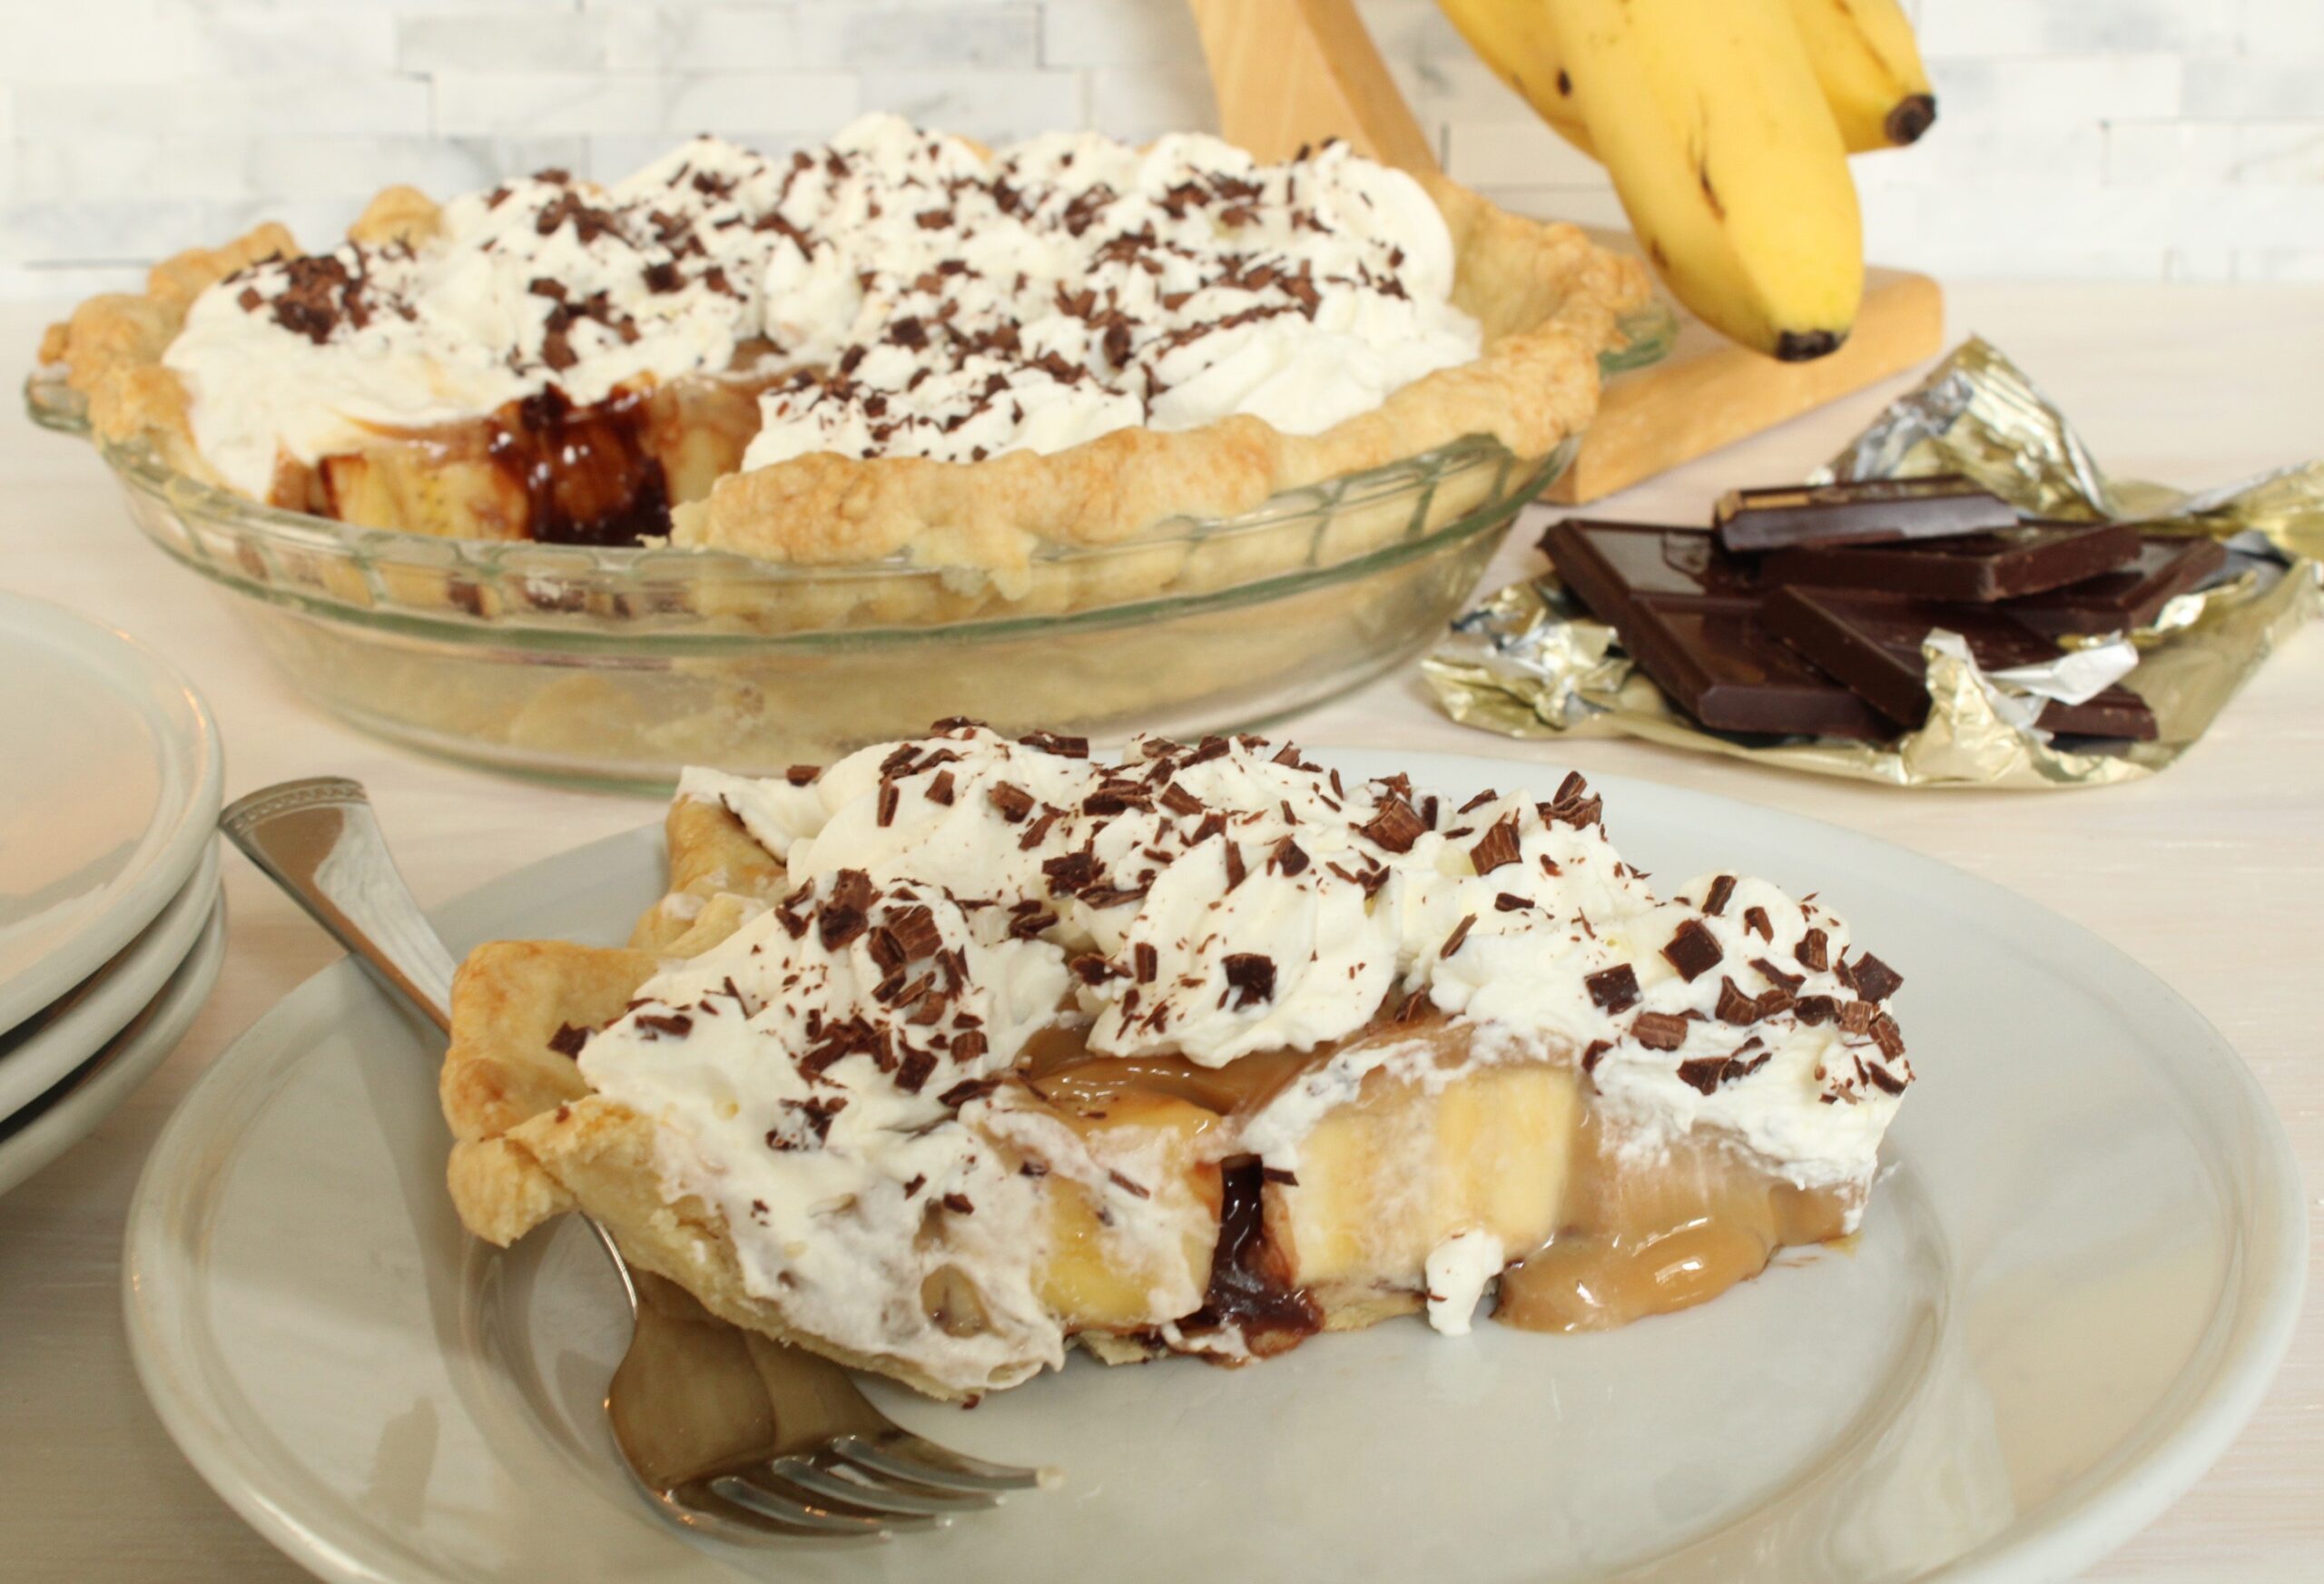 Banoffee Pie in Pastry Crust with Chocolate Ganache